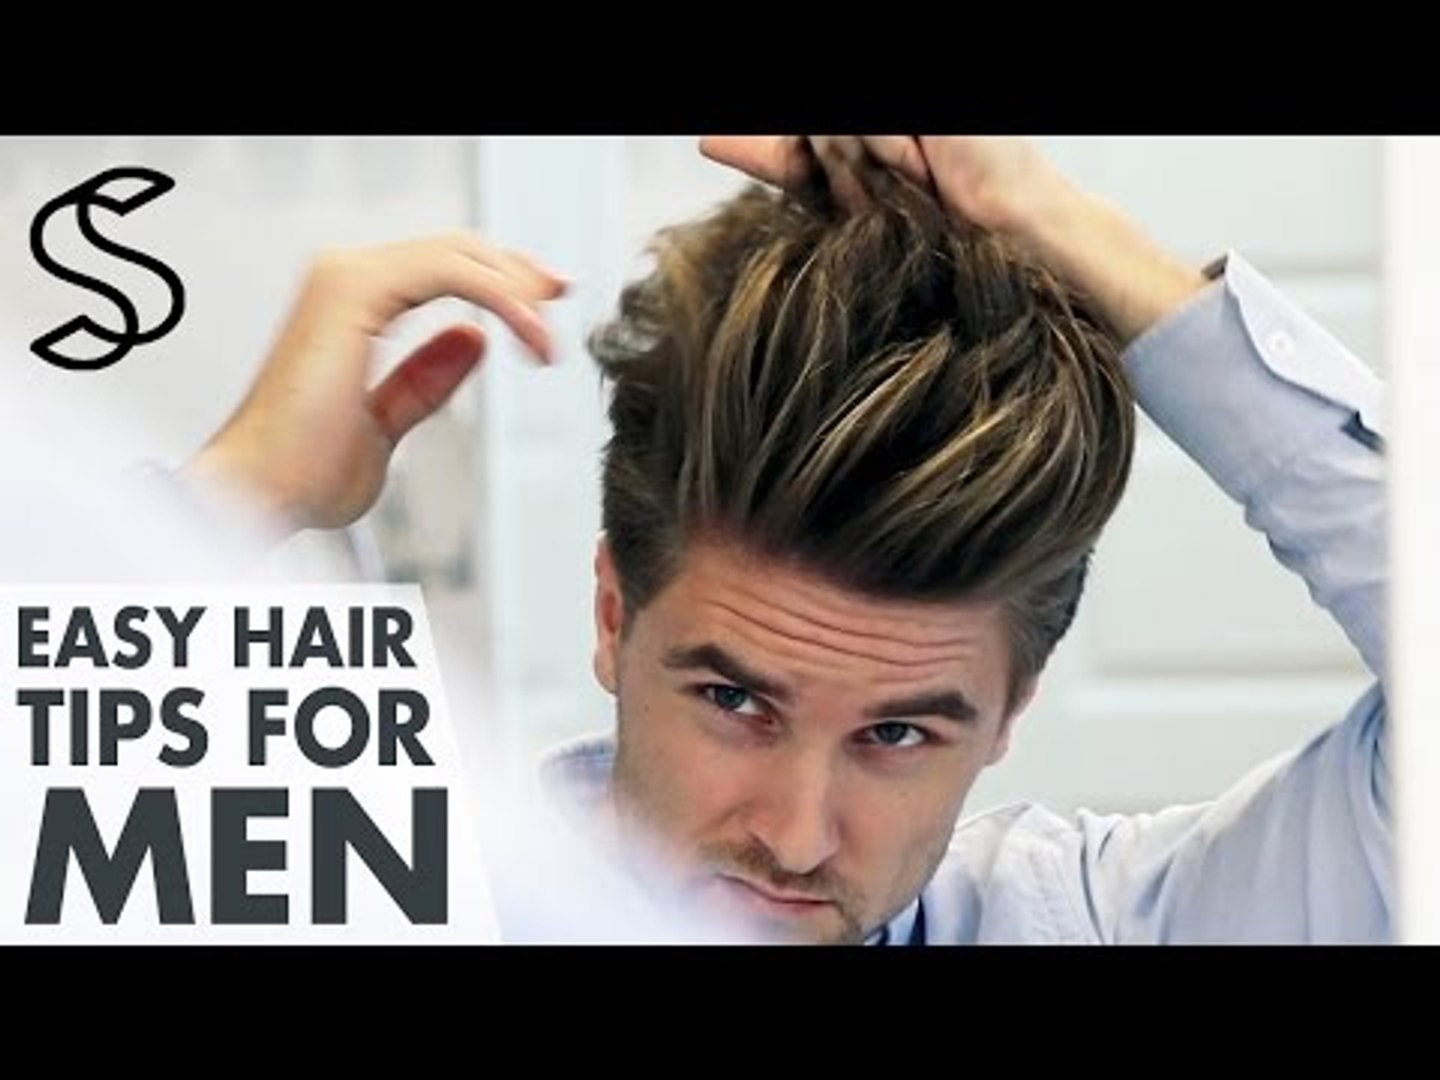 Men's Hairstyling Tips ☆ 5 Min Hair Guide ☆ Men's Look - video Dailymotion